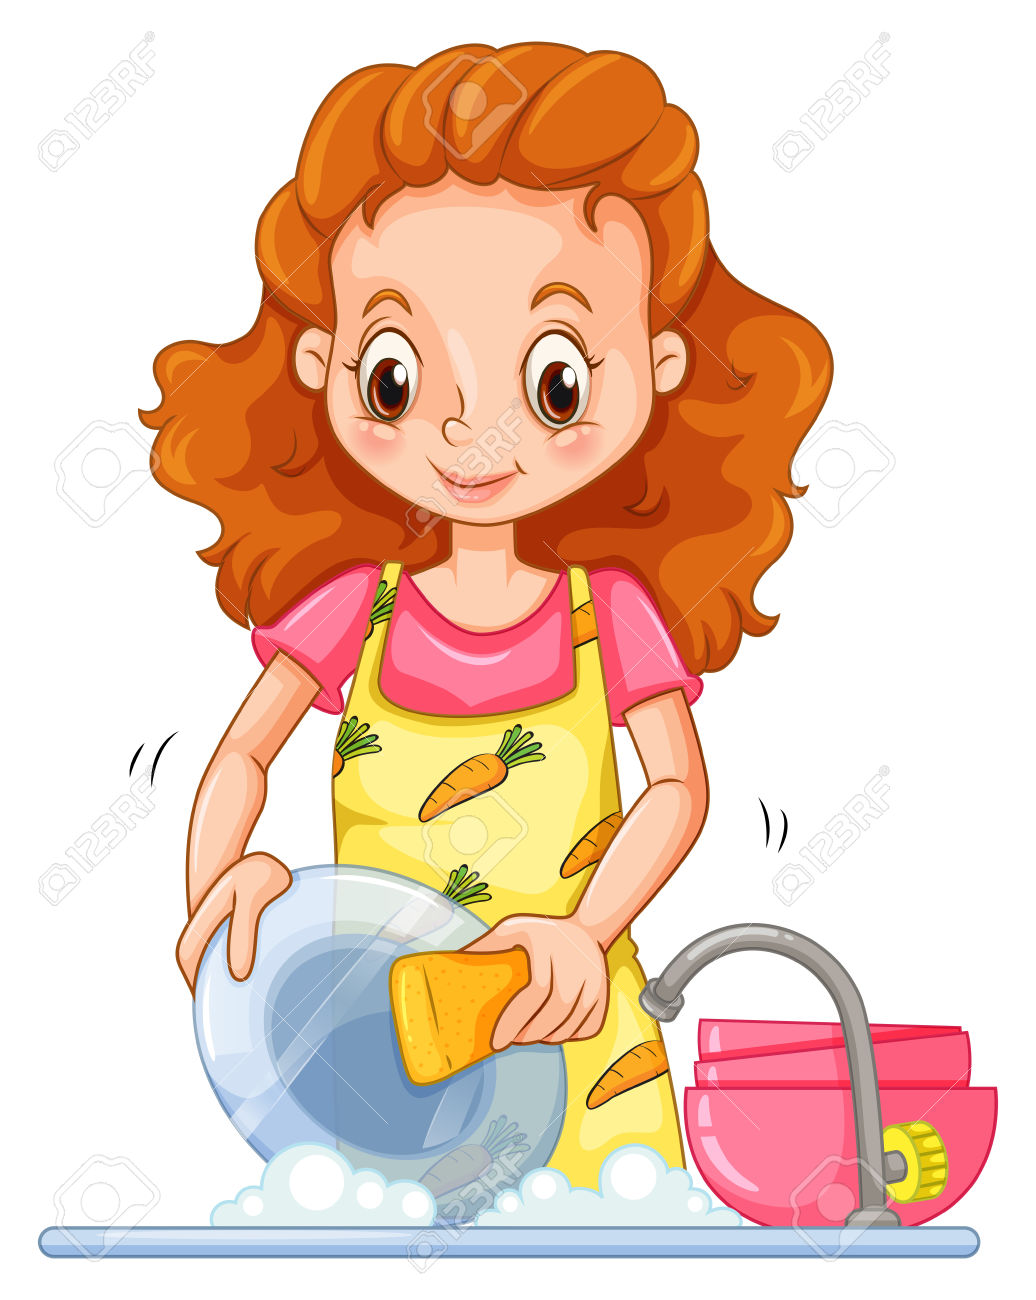 Washing dishes clipart - Clipground